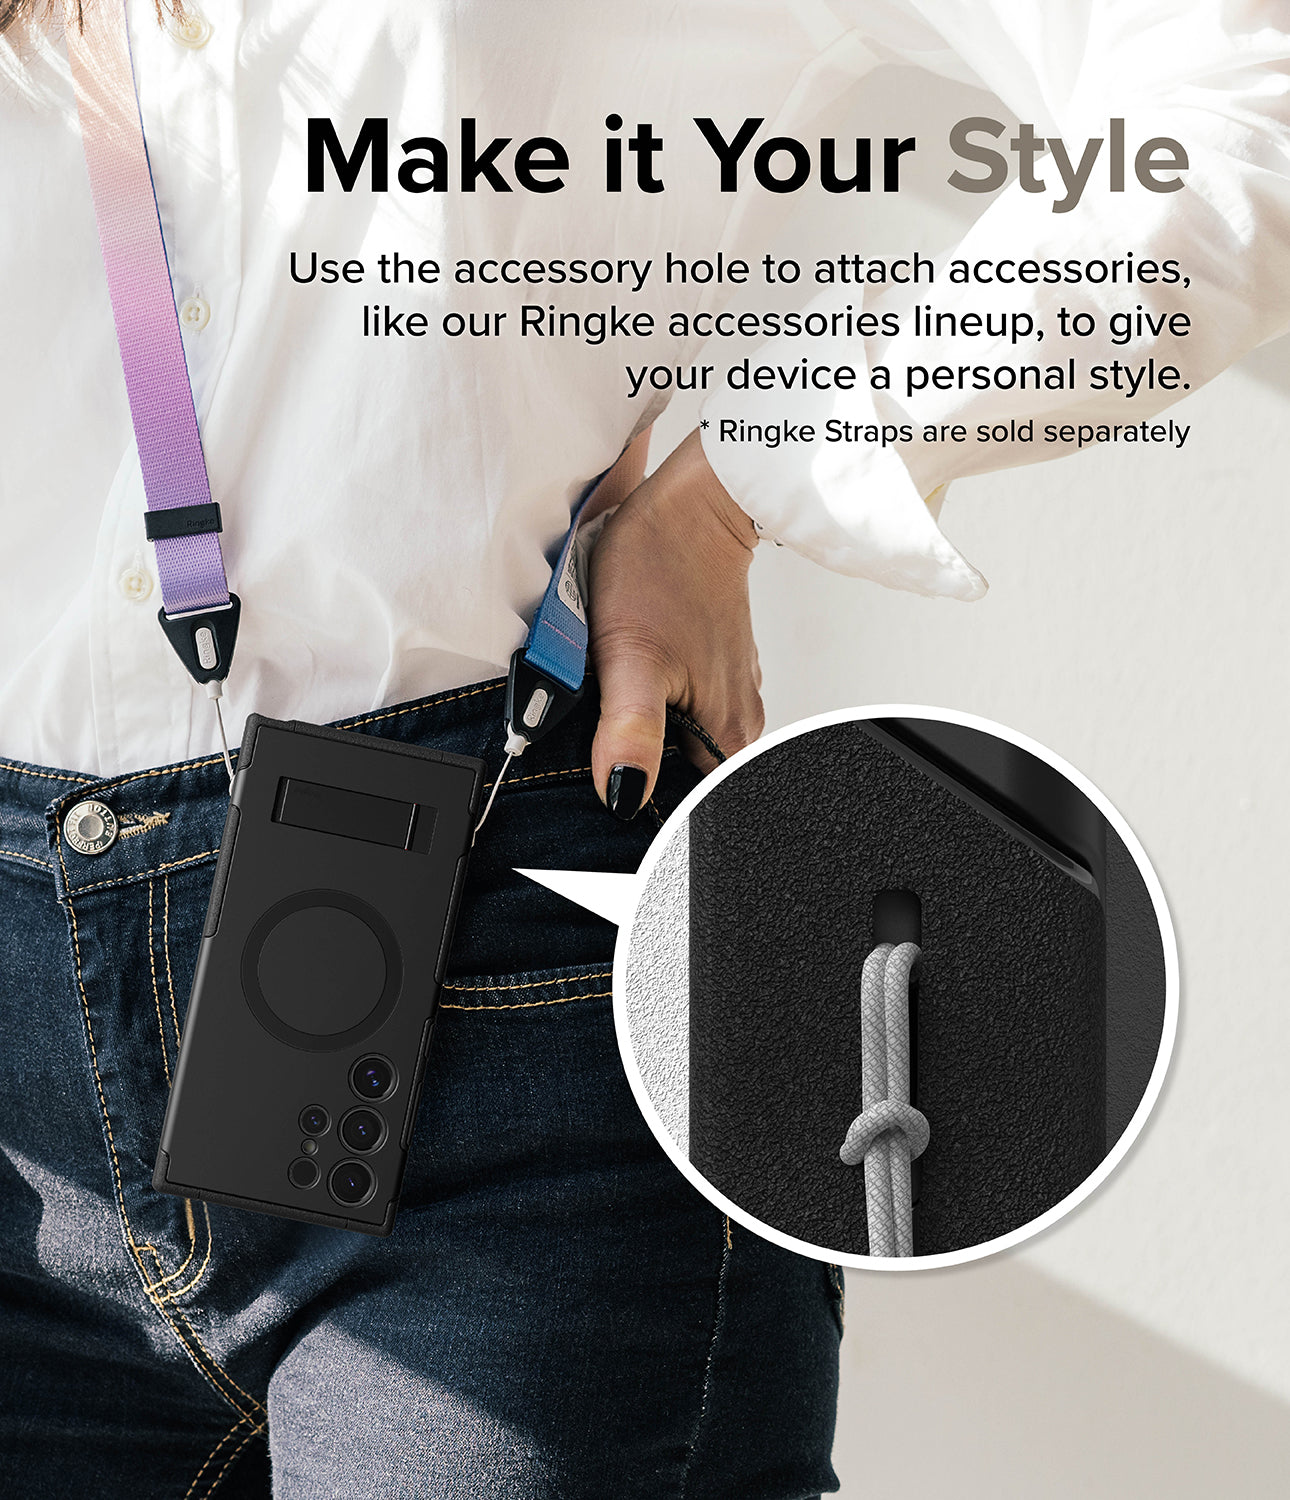 Galaxy S24 Ultra Case | Alles - Make it Your Style. Use the accessory hole to attach accessories, like our Ringke accessories lineup, to give your device a personal style.